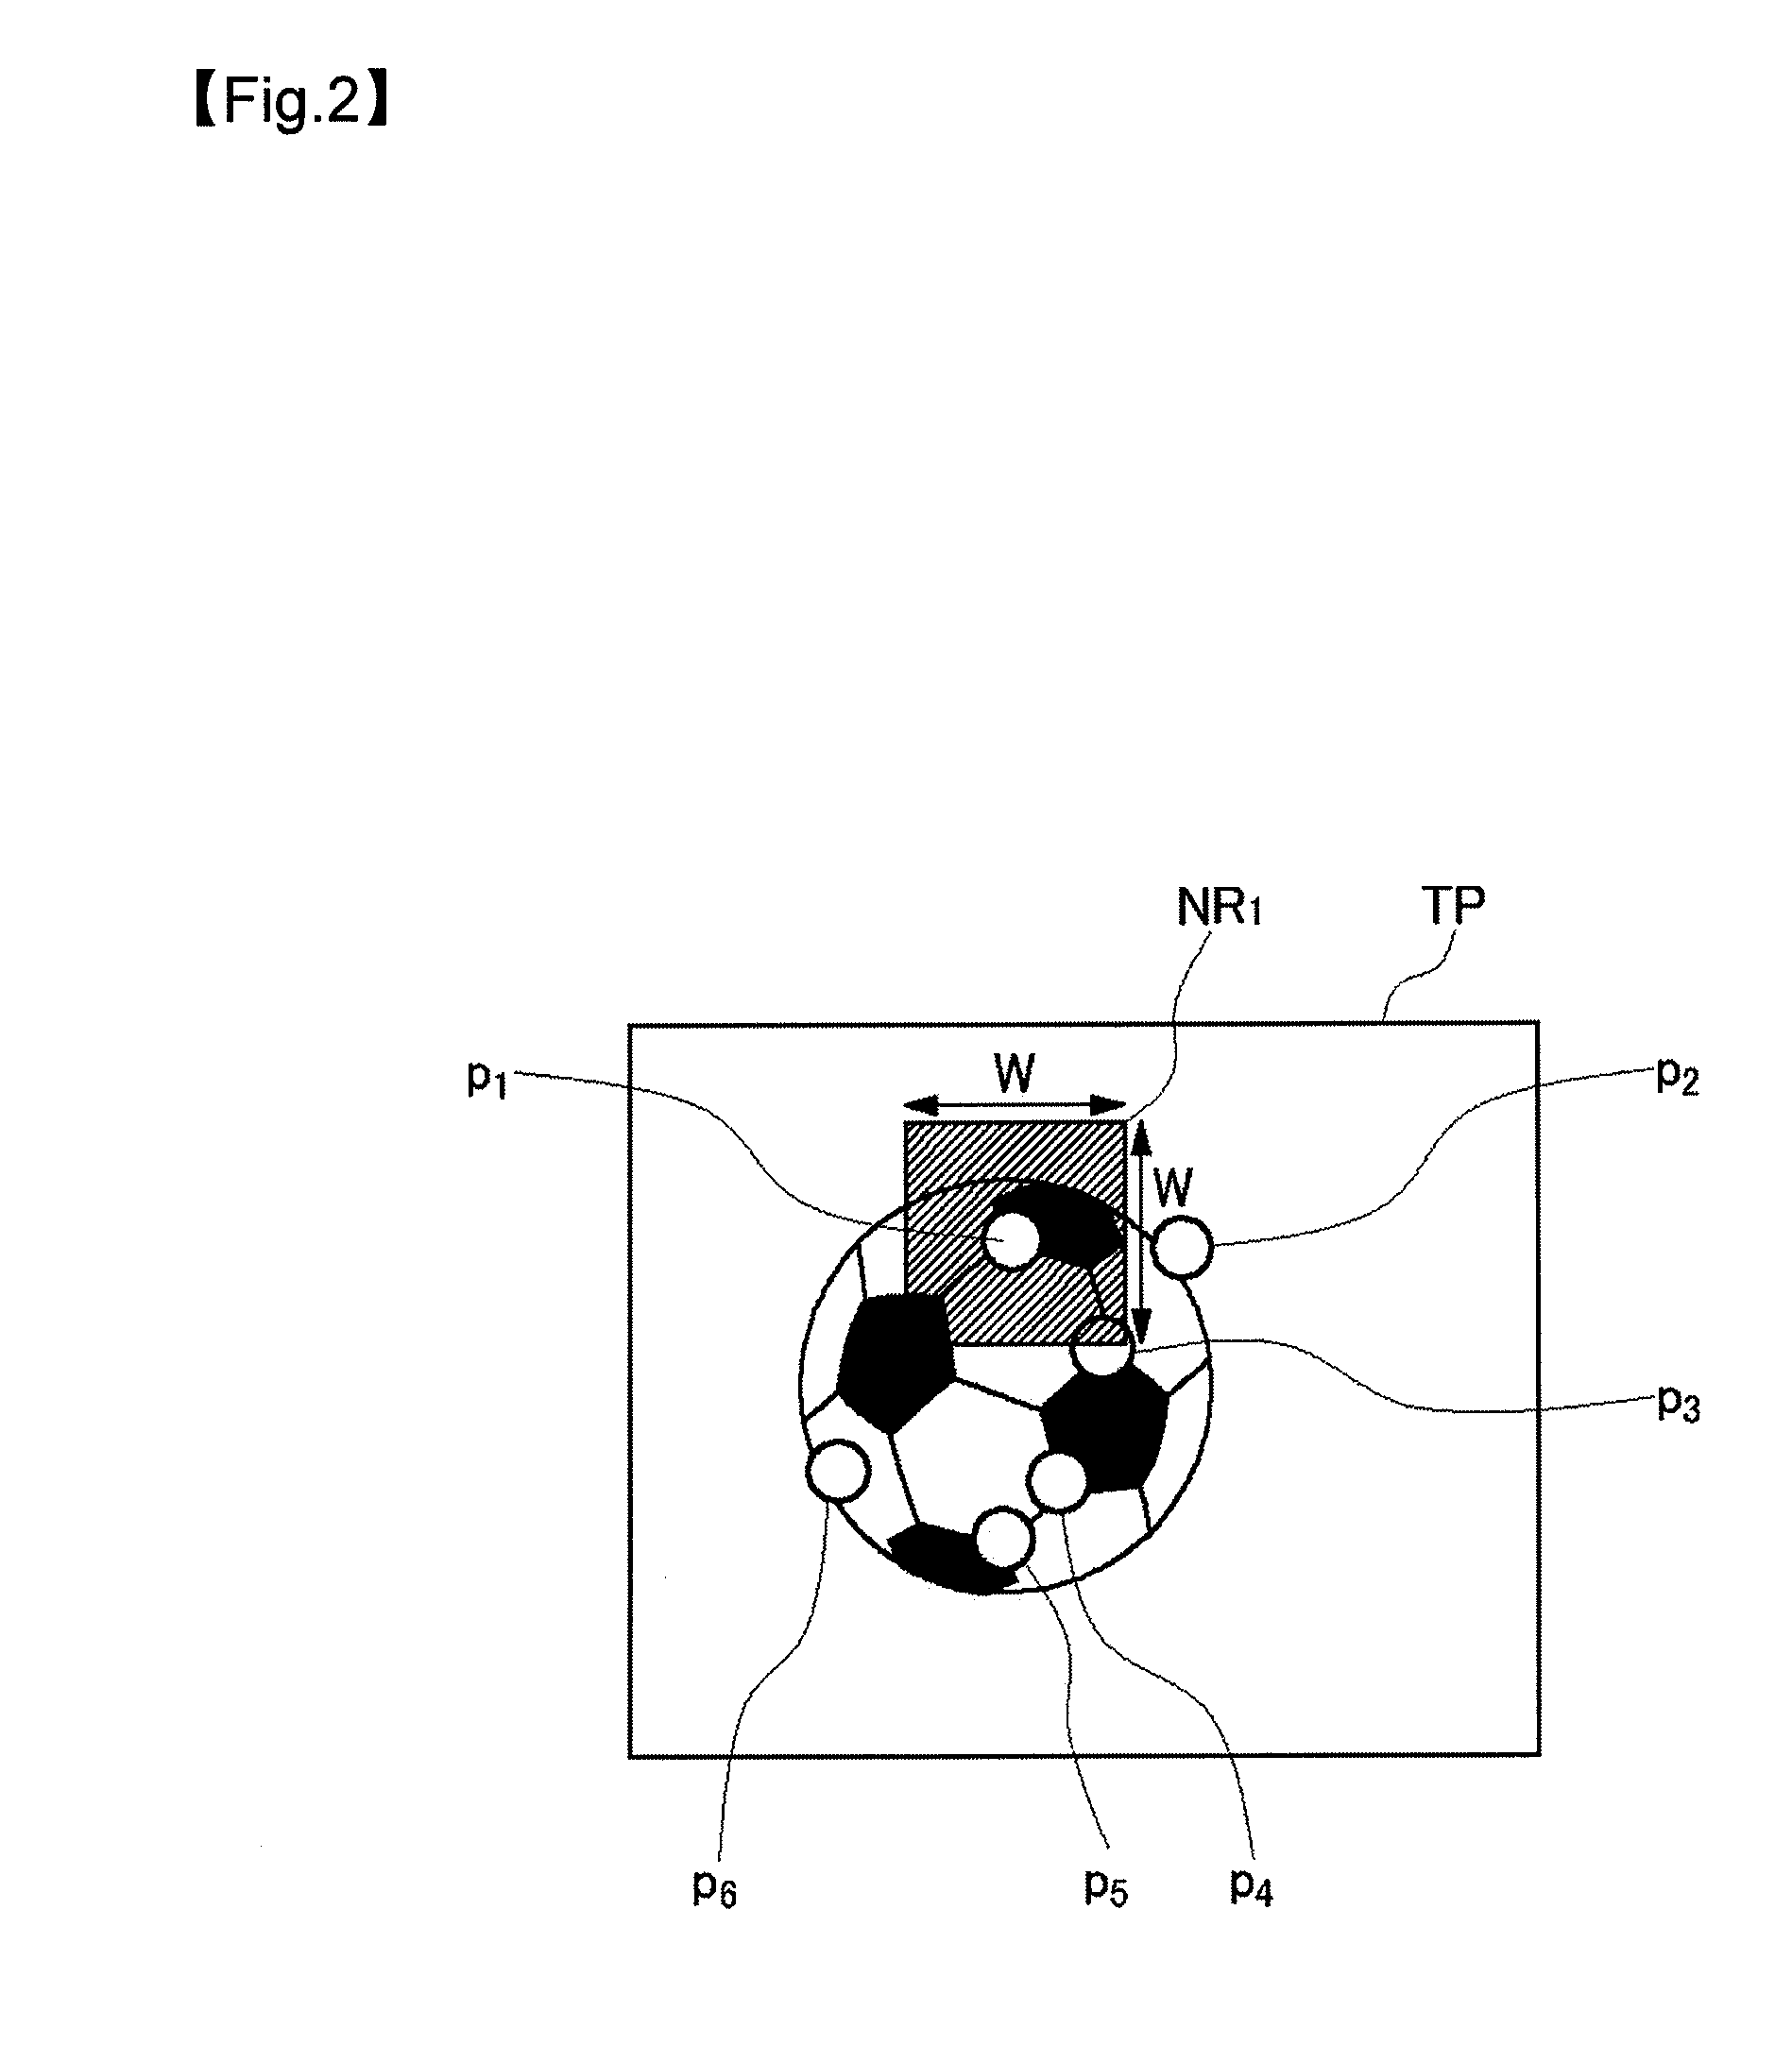 Local feature amount calculating device, method of calculating local feature amount, corresponding point searching apparatus, and method of searching corresponding point